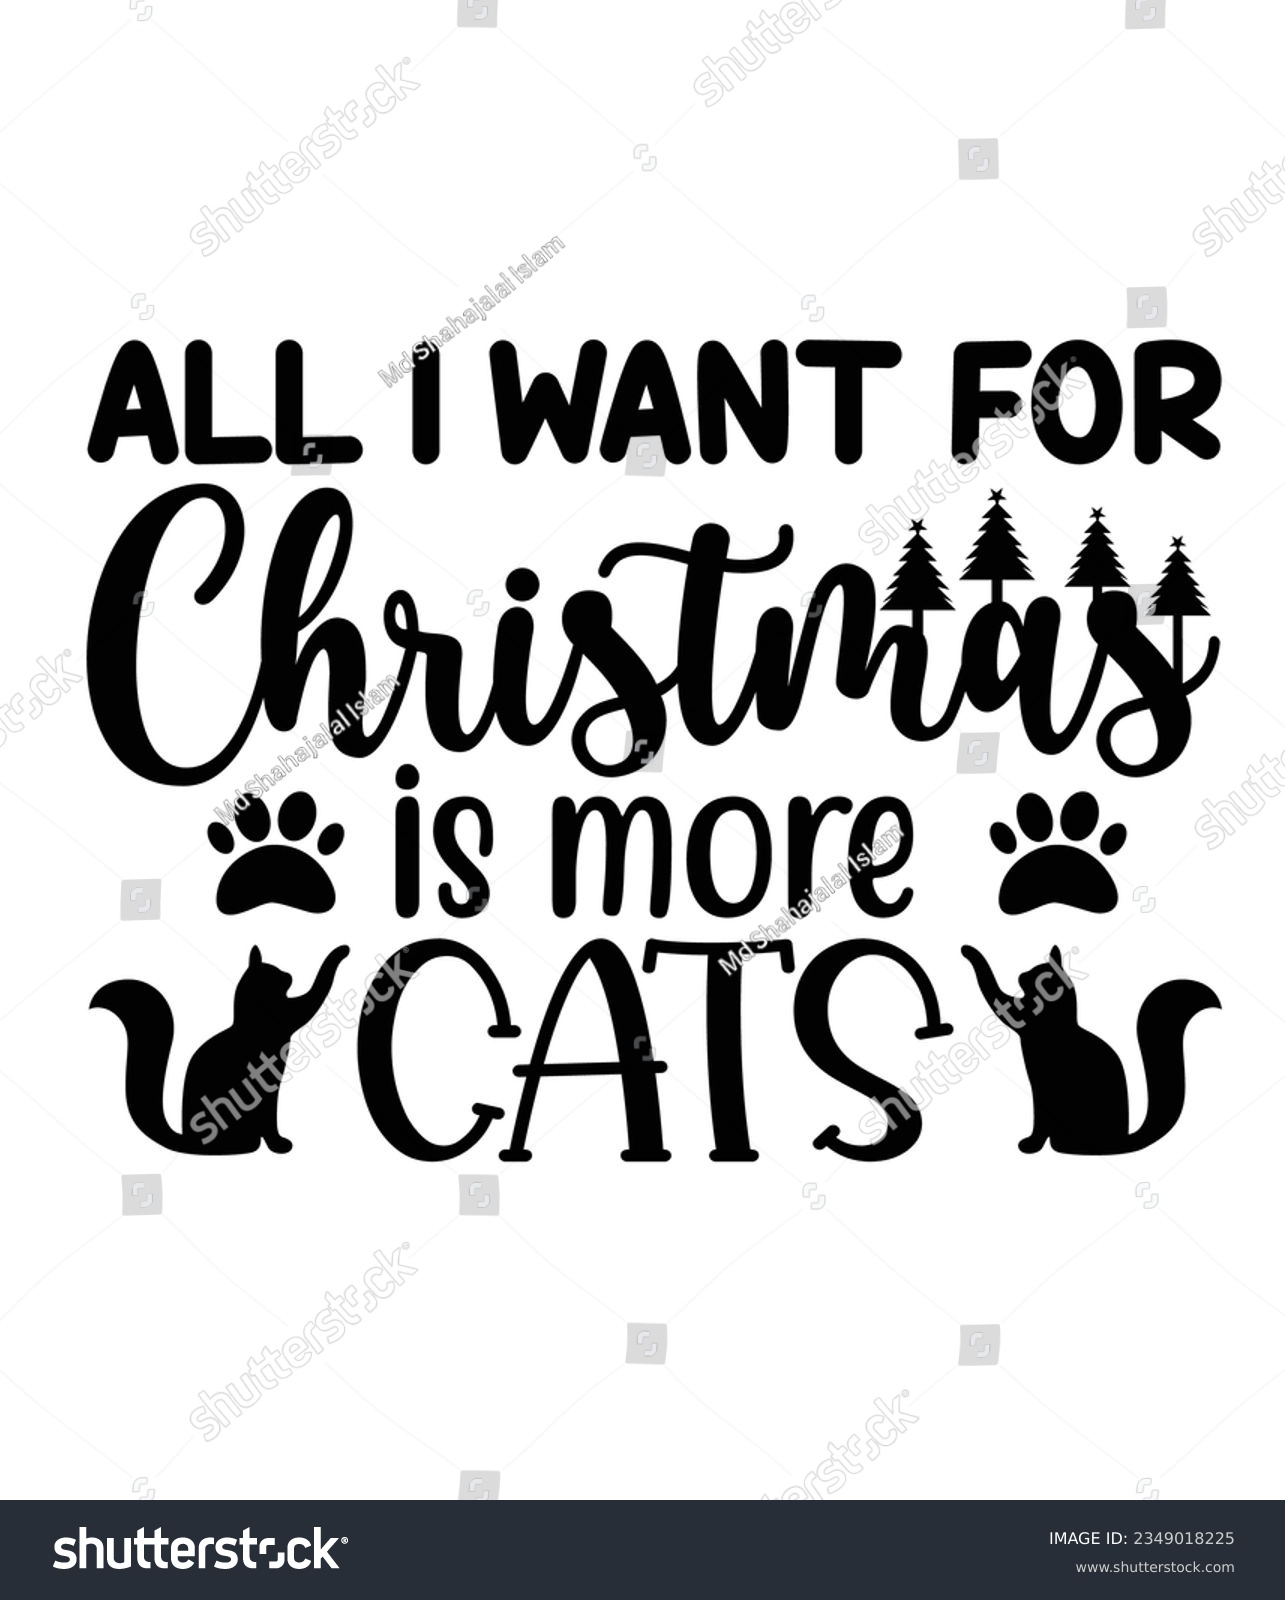 SVG of All i want for Christmas is more cats, Christmas SVG, Funny Christmas Quotes, Winter SVG, Merry Christmas, Santa SVG, typography, vintage, t shirts design, Holiday shirt svg